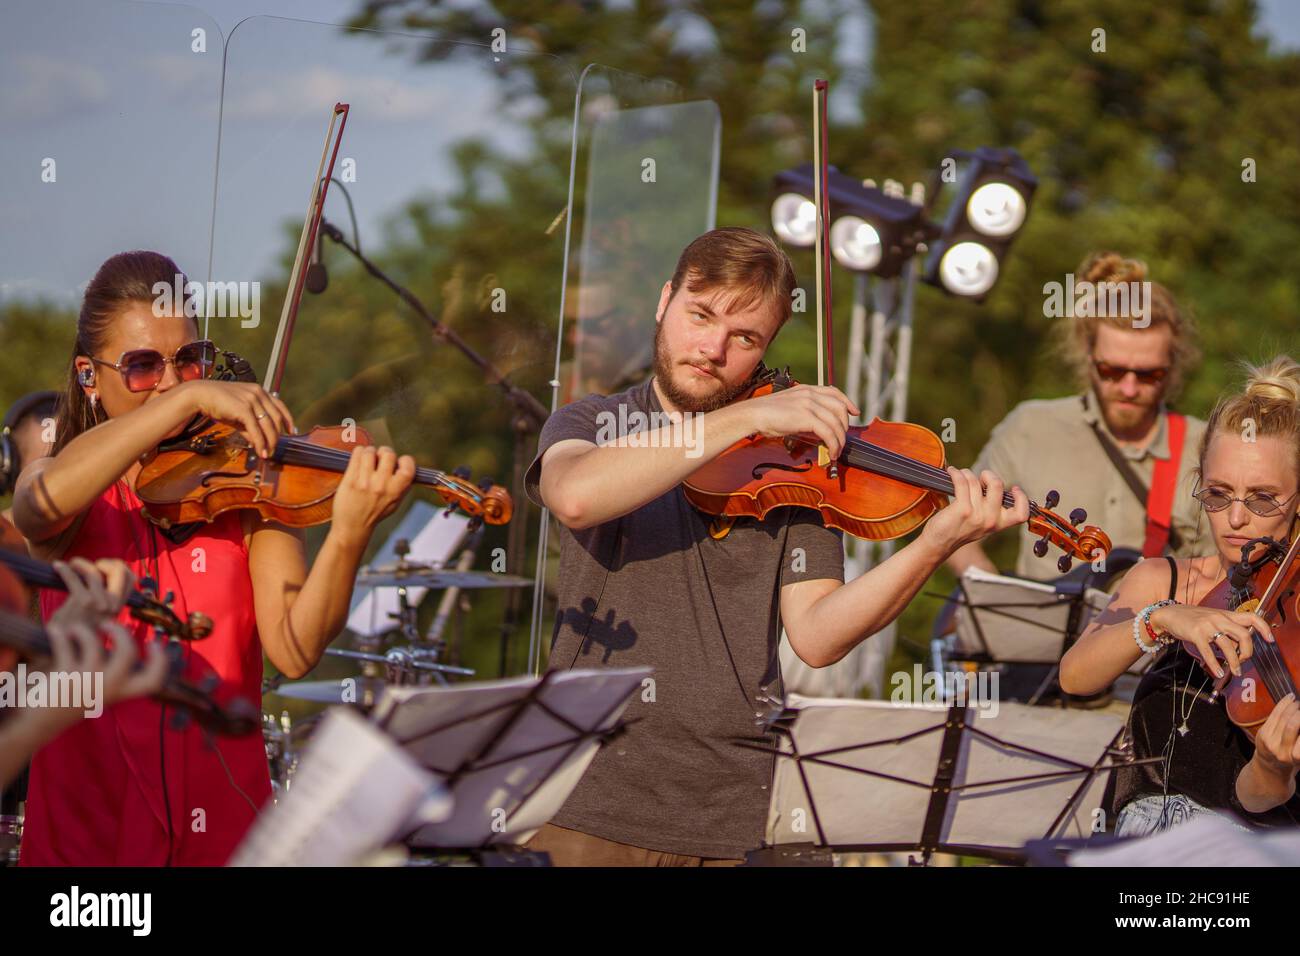 Violin players playing classic music at outdoor concert Stock Photo